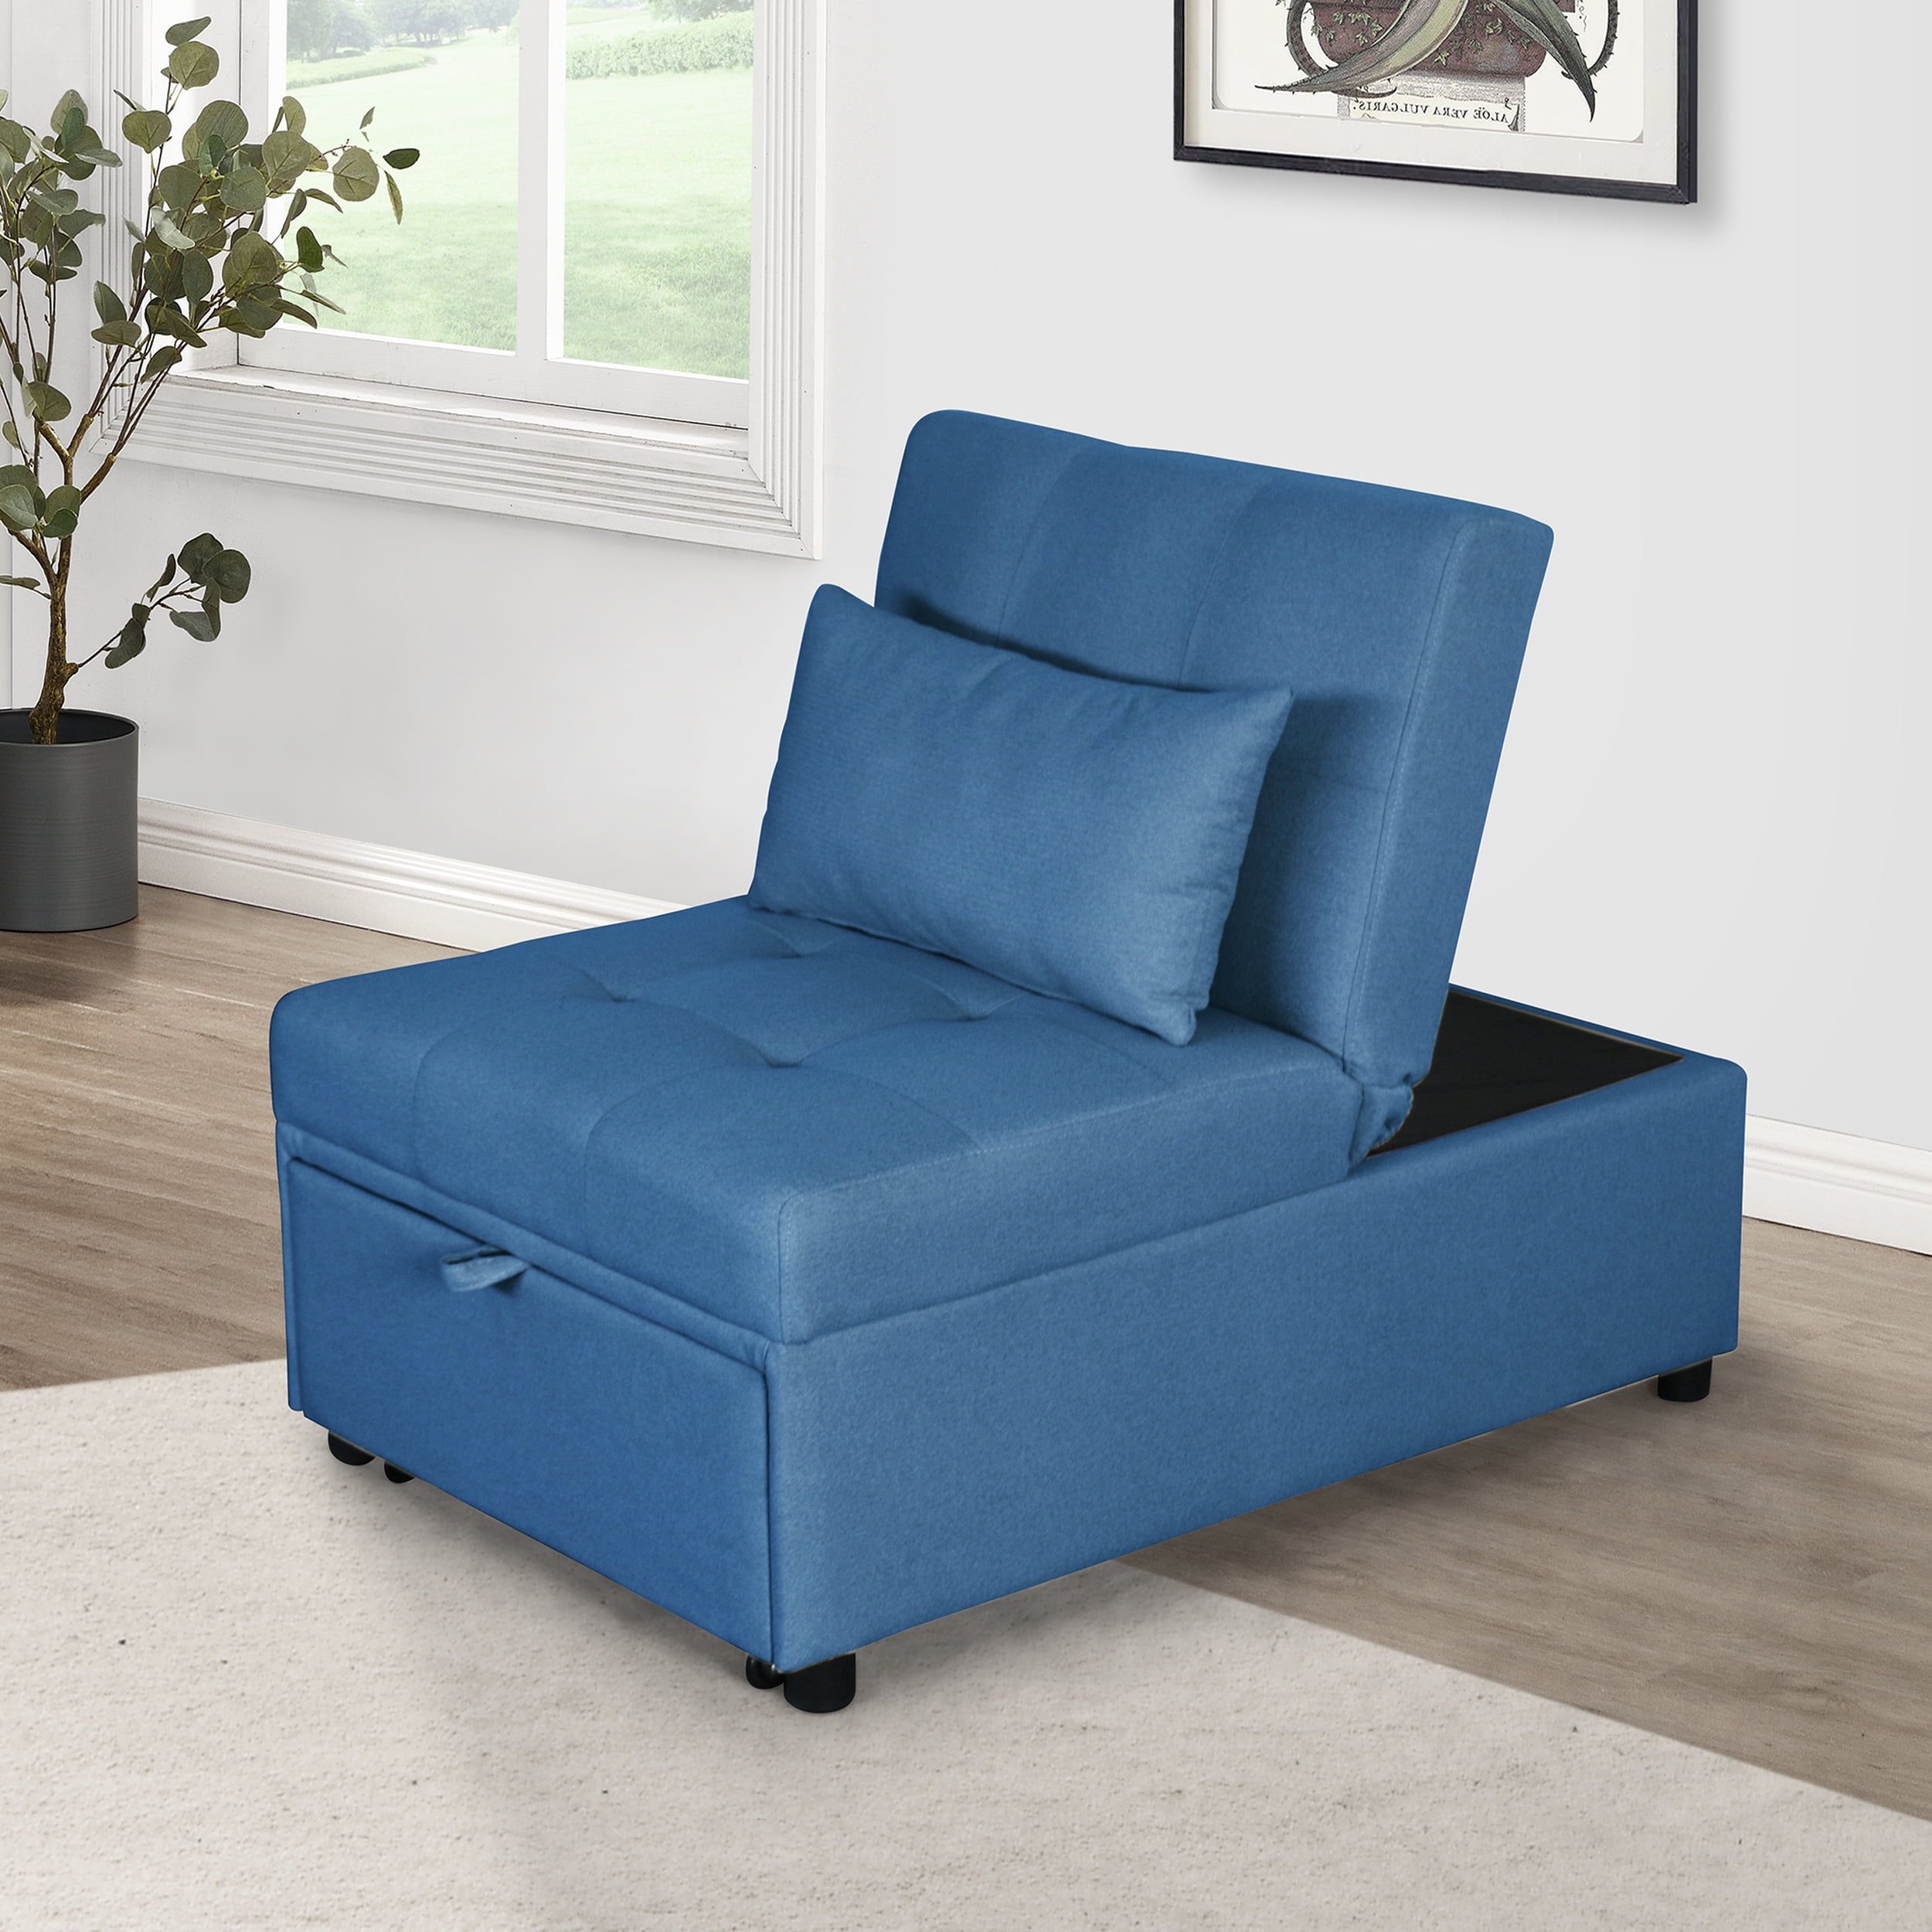 Sofa Bed, Convertible Chair Sleeper Bed, 4 In 1 Multi Function Folding  Ottoman Modern Breathable Fabric Guest Bed With Adjustable Sleeper For  Small Room Apartment (blue) – Walmart Throughout 4 In 1 Convertible Sleeper Chair Beds (View 8 of 15)